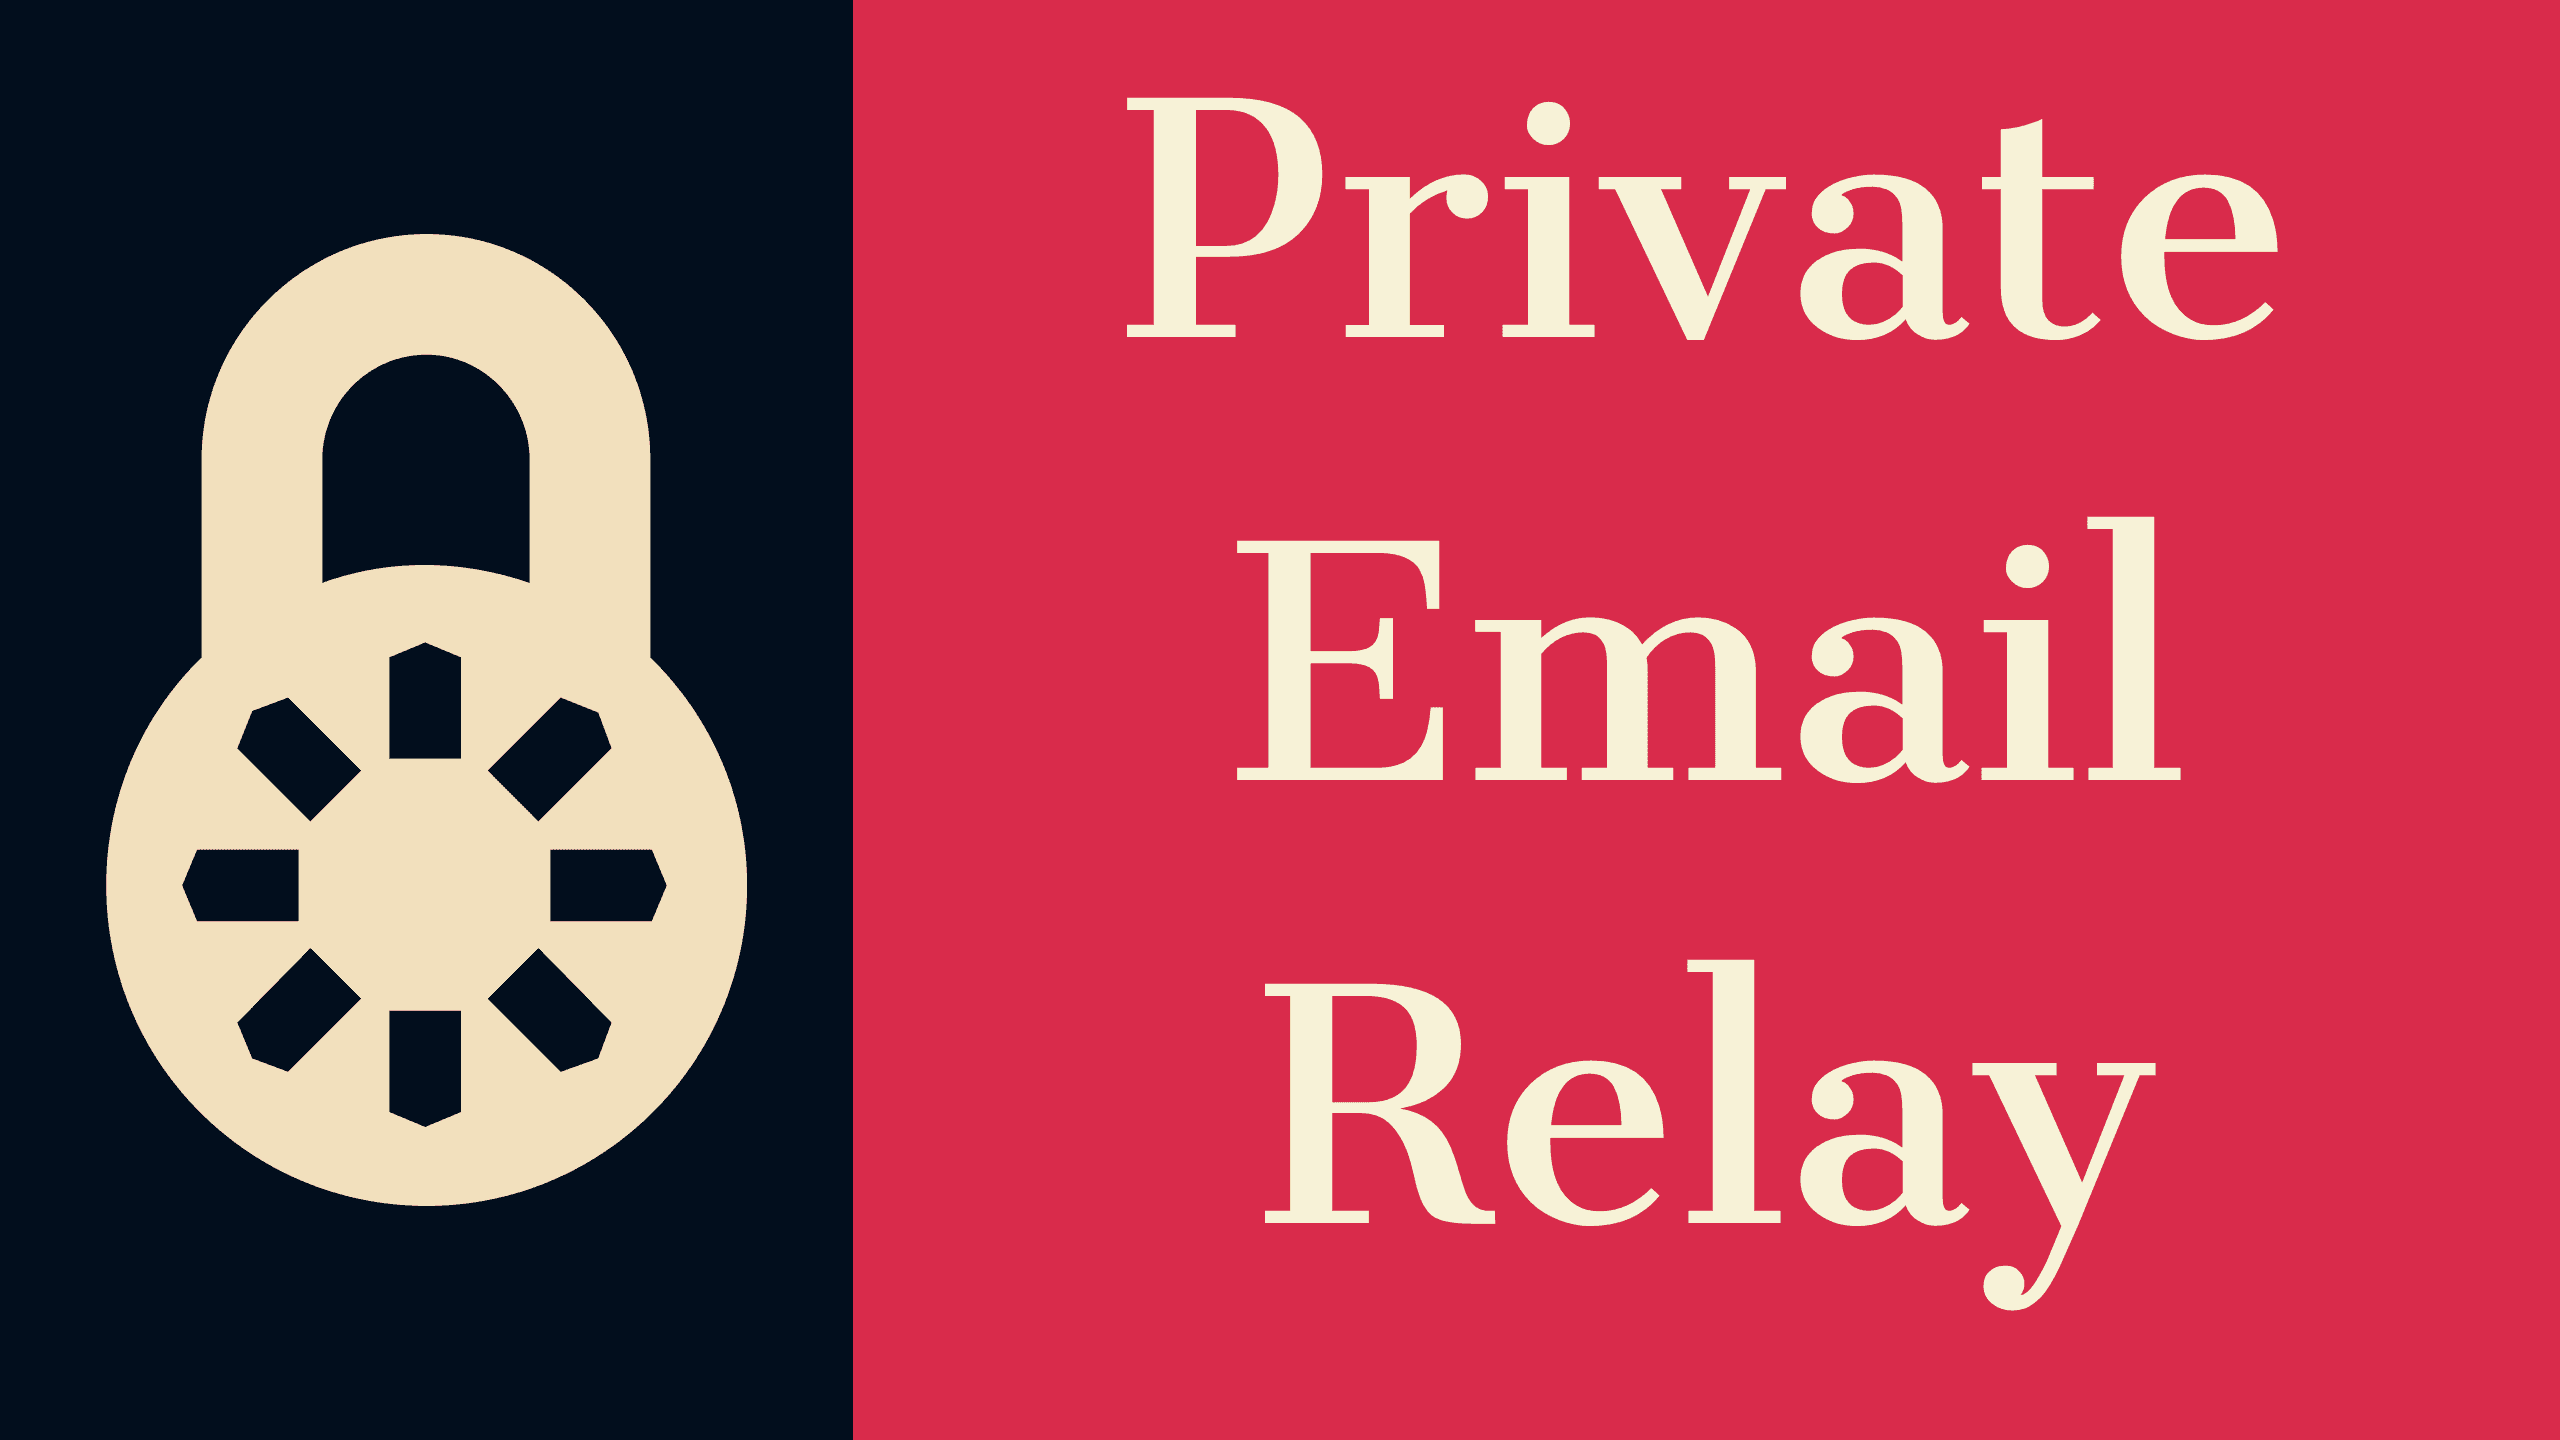 How to setup a Custom Private Email Relay like Hide My Email - Part 1 featured image